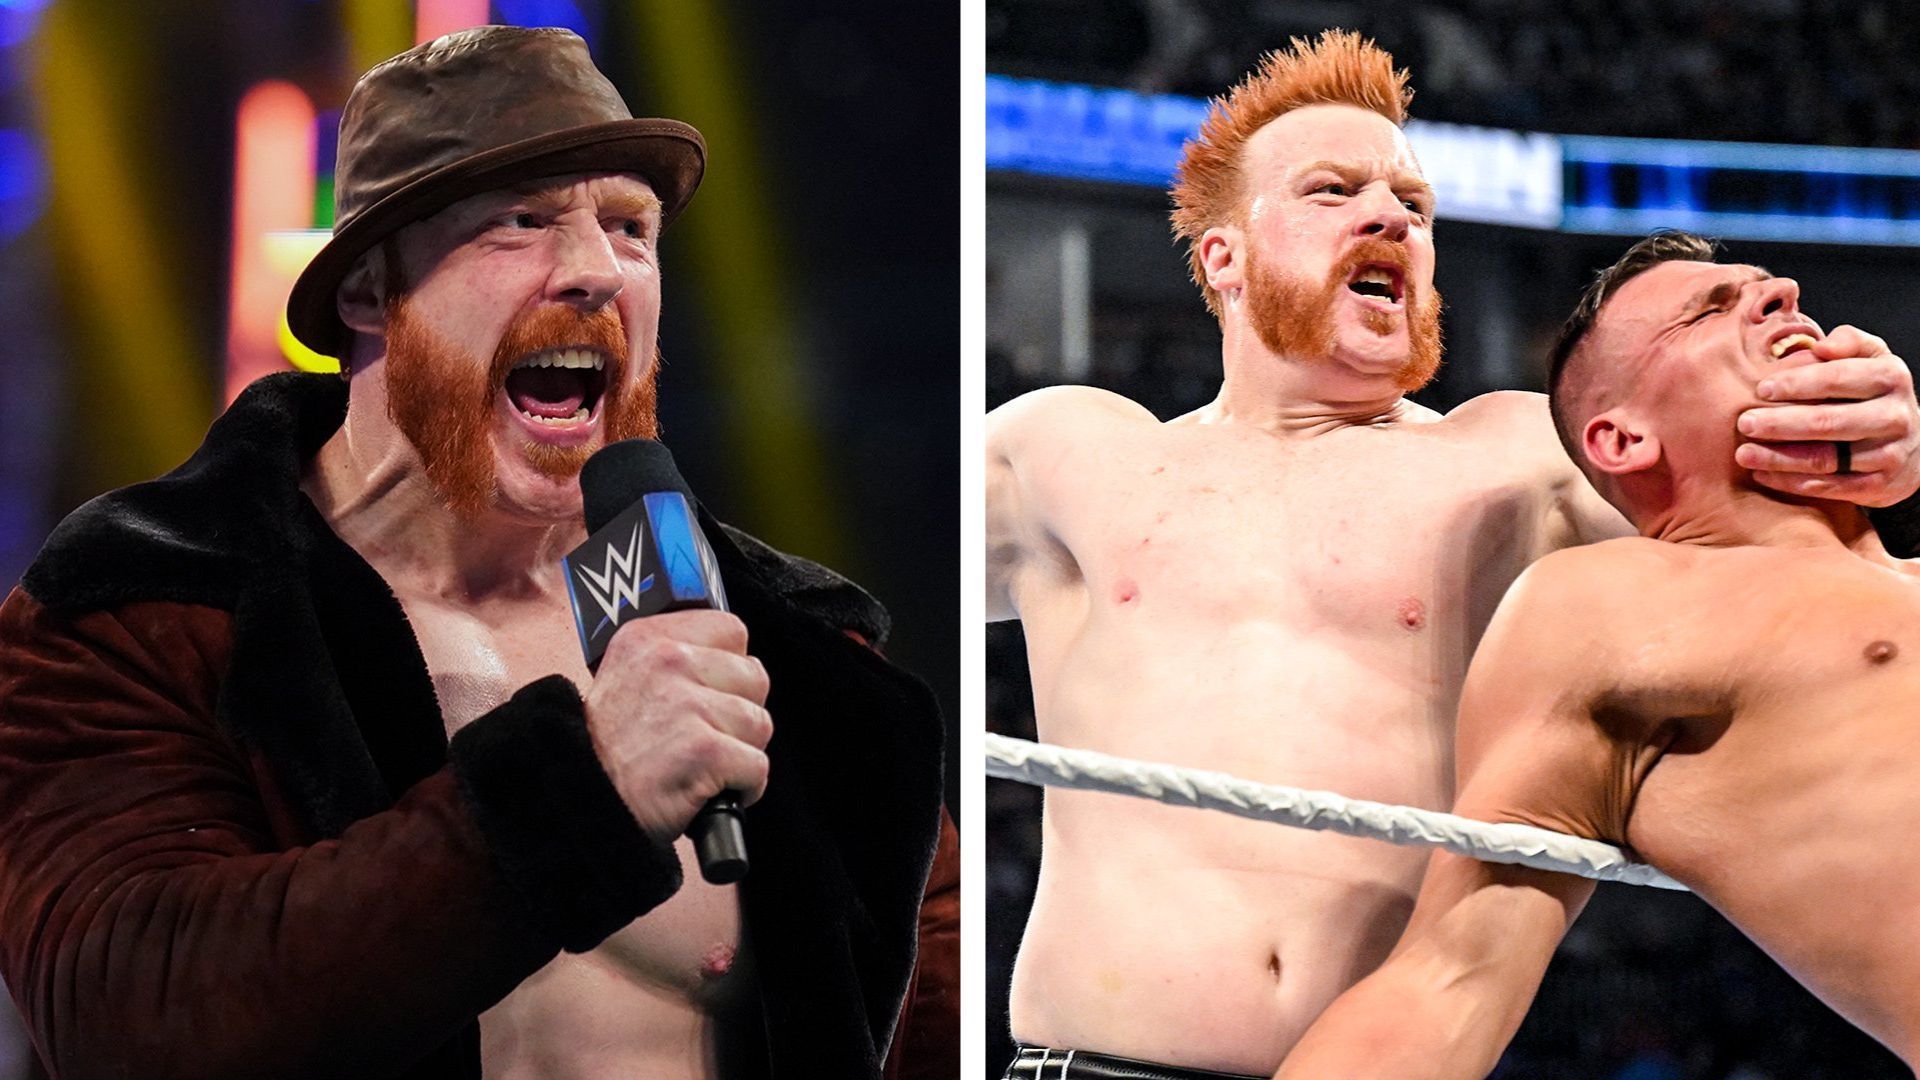 Sheamus could potentially move brands in the WWE Draft